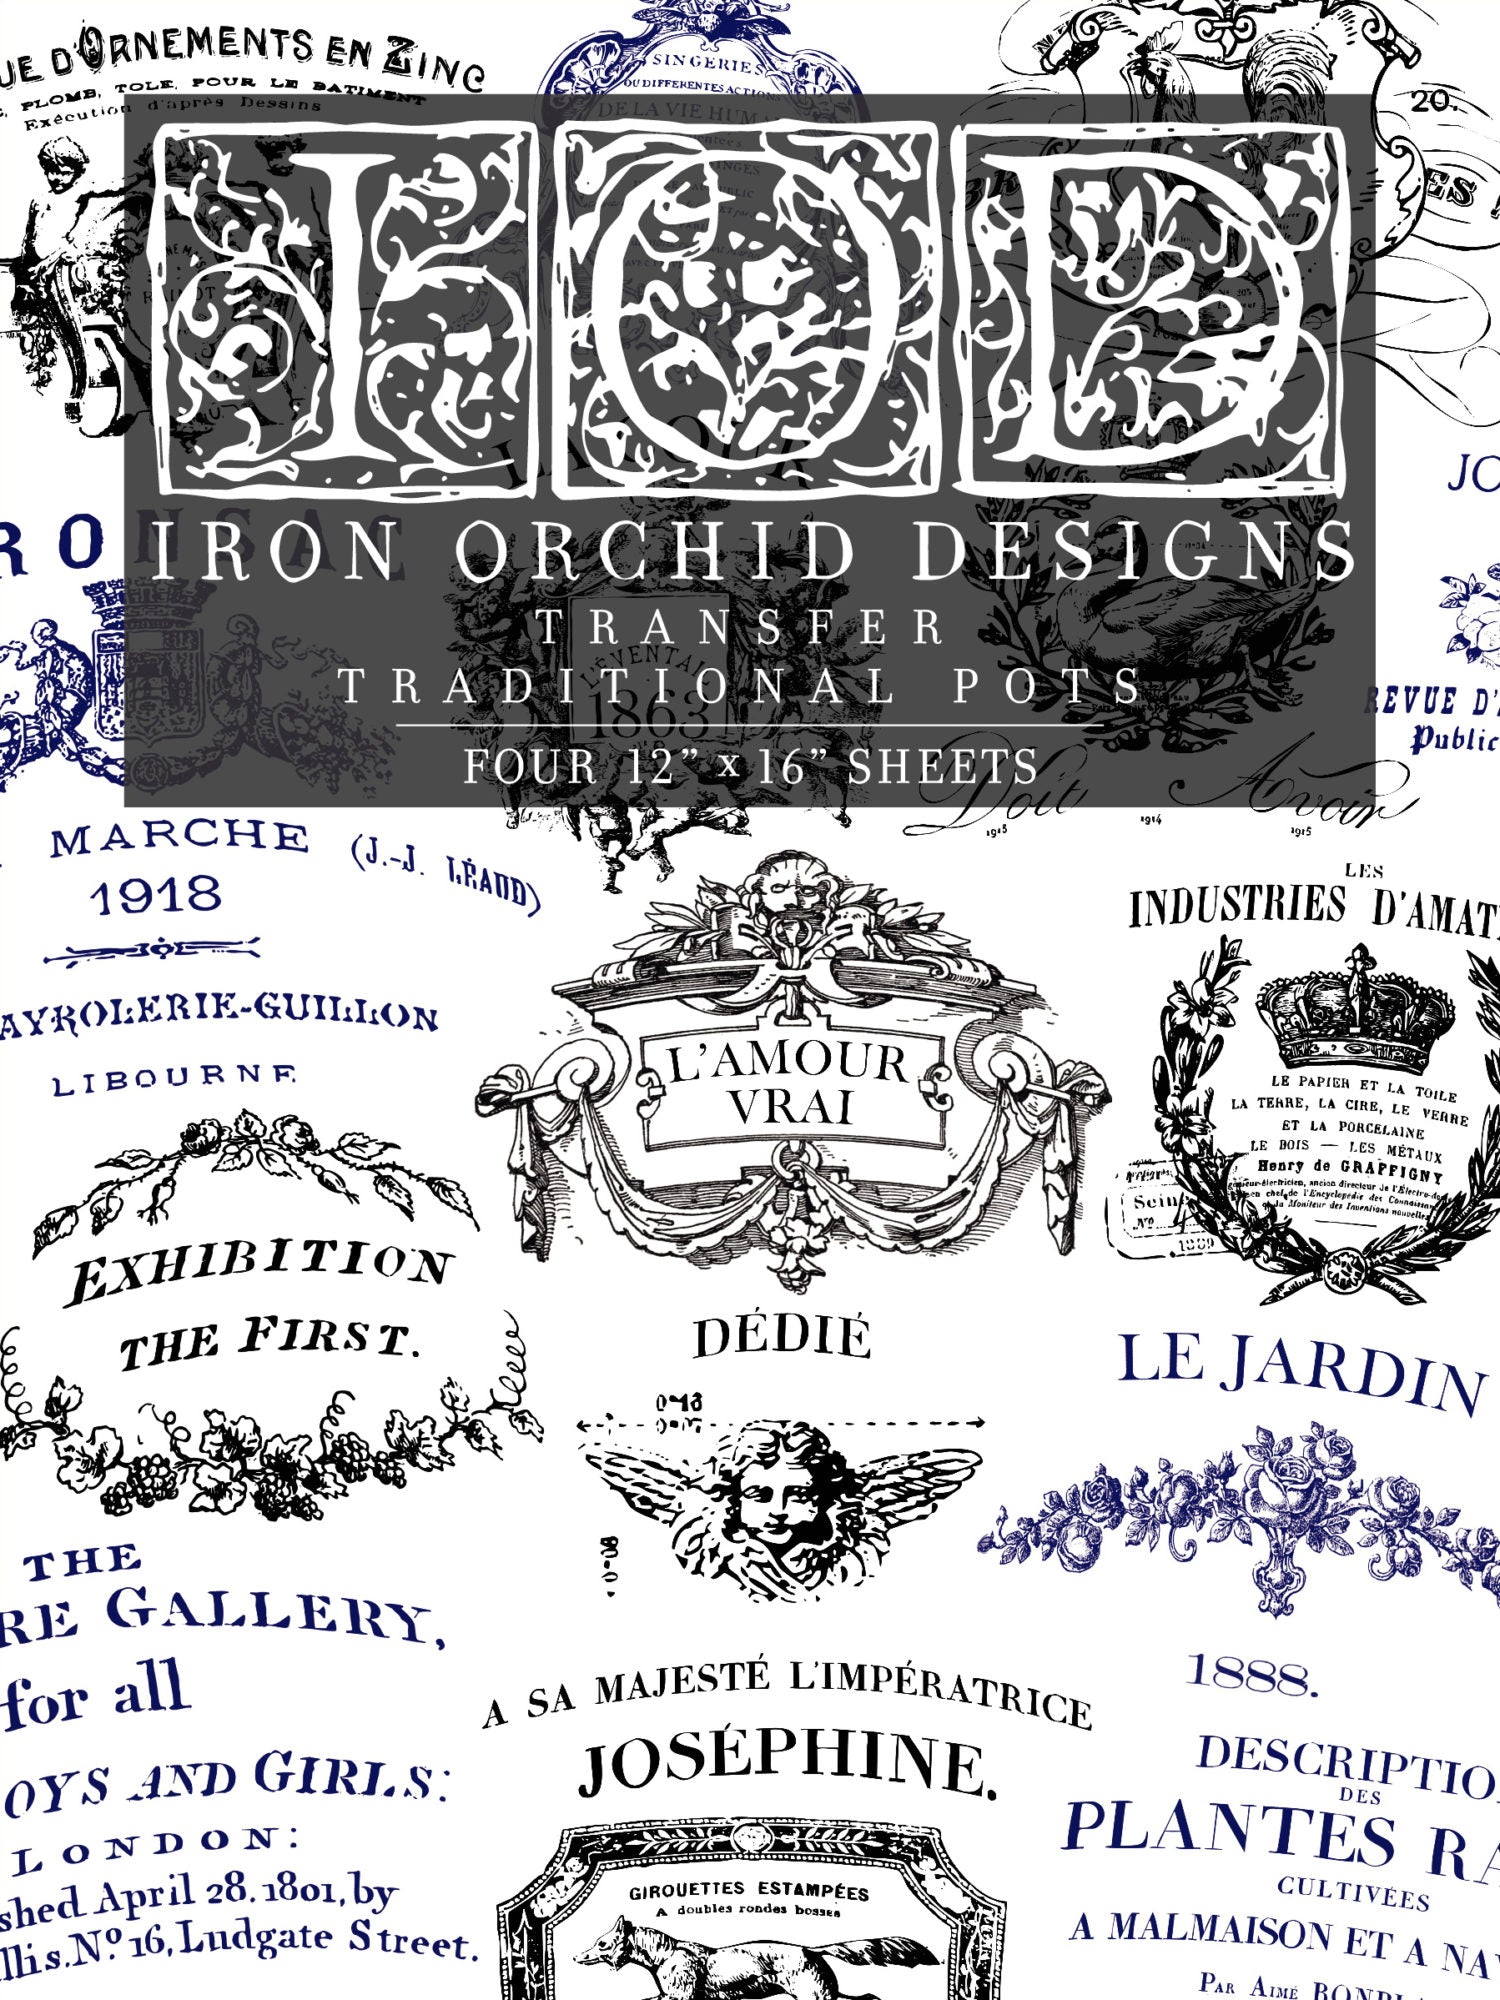 IOD June Transfer - April 2021 Iron Orchid Designs New Product Release – IOD  Public